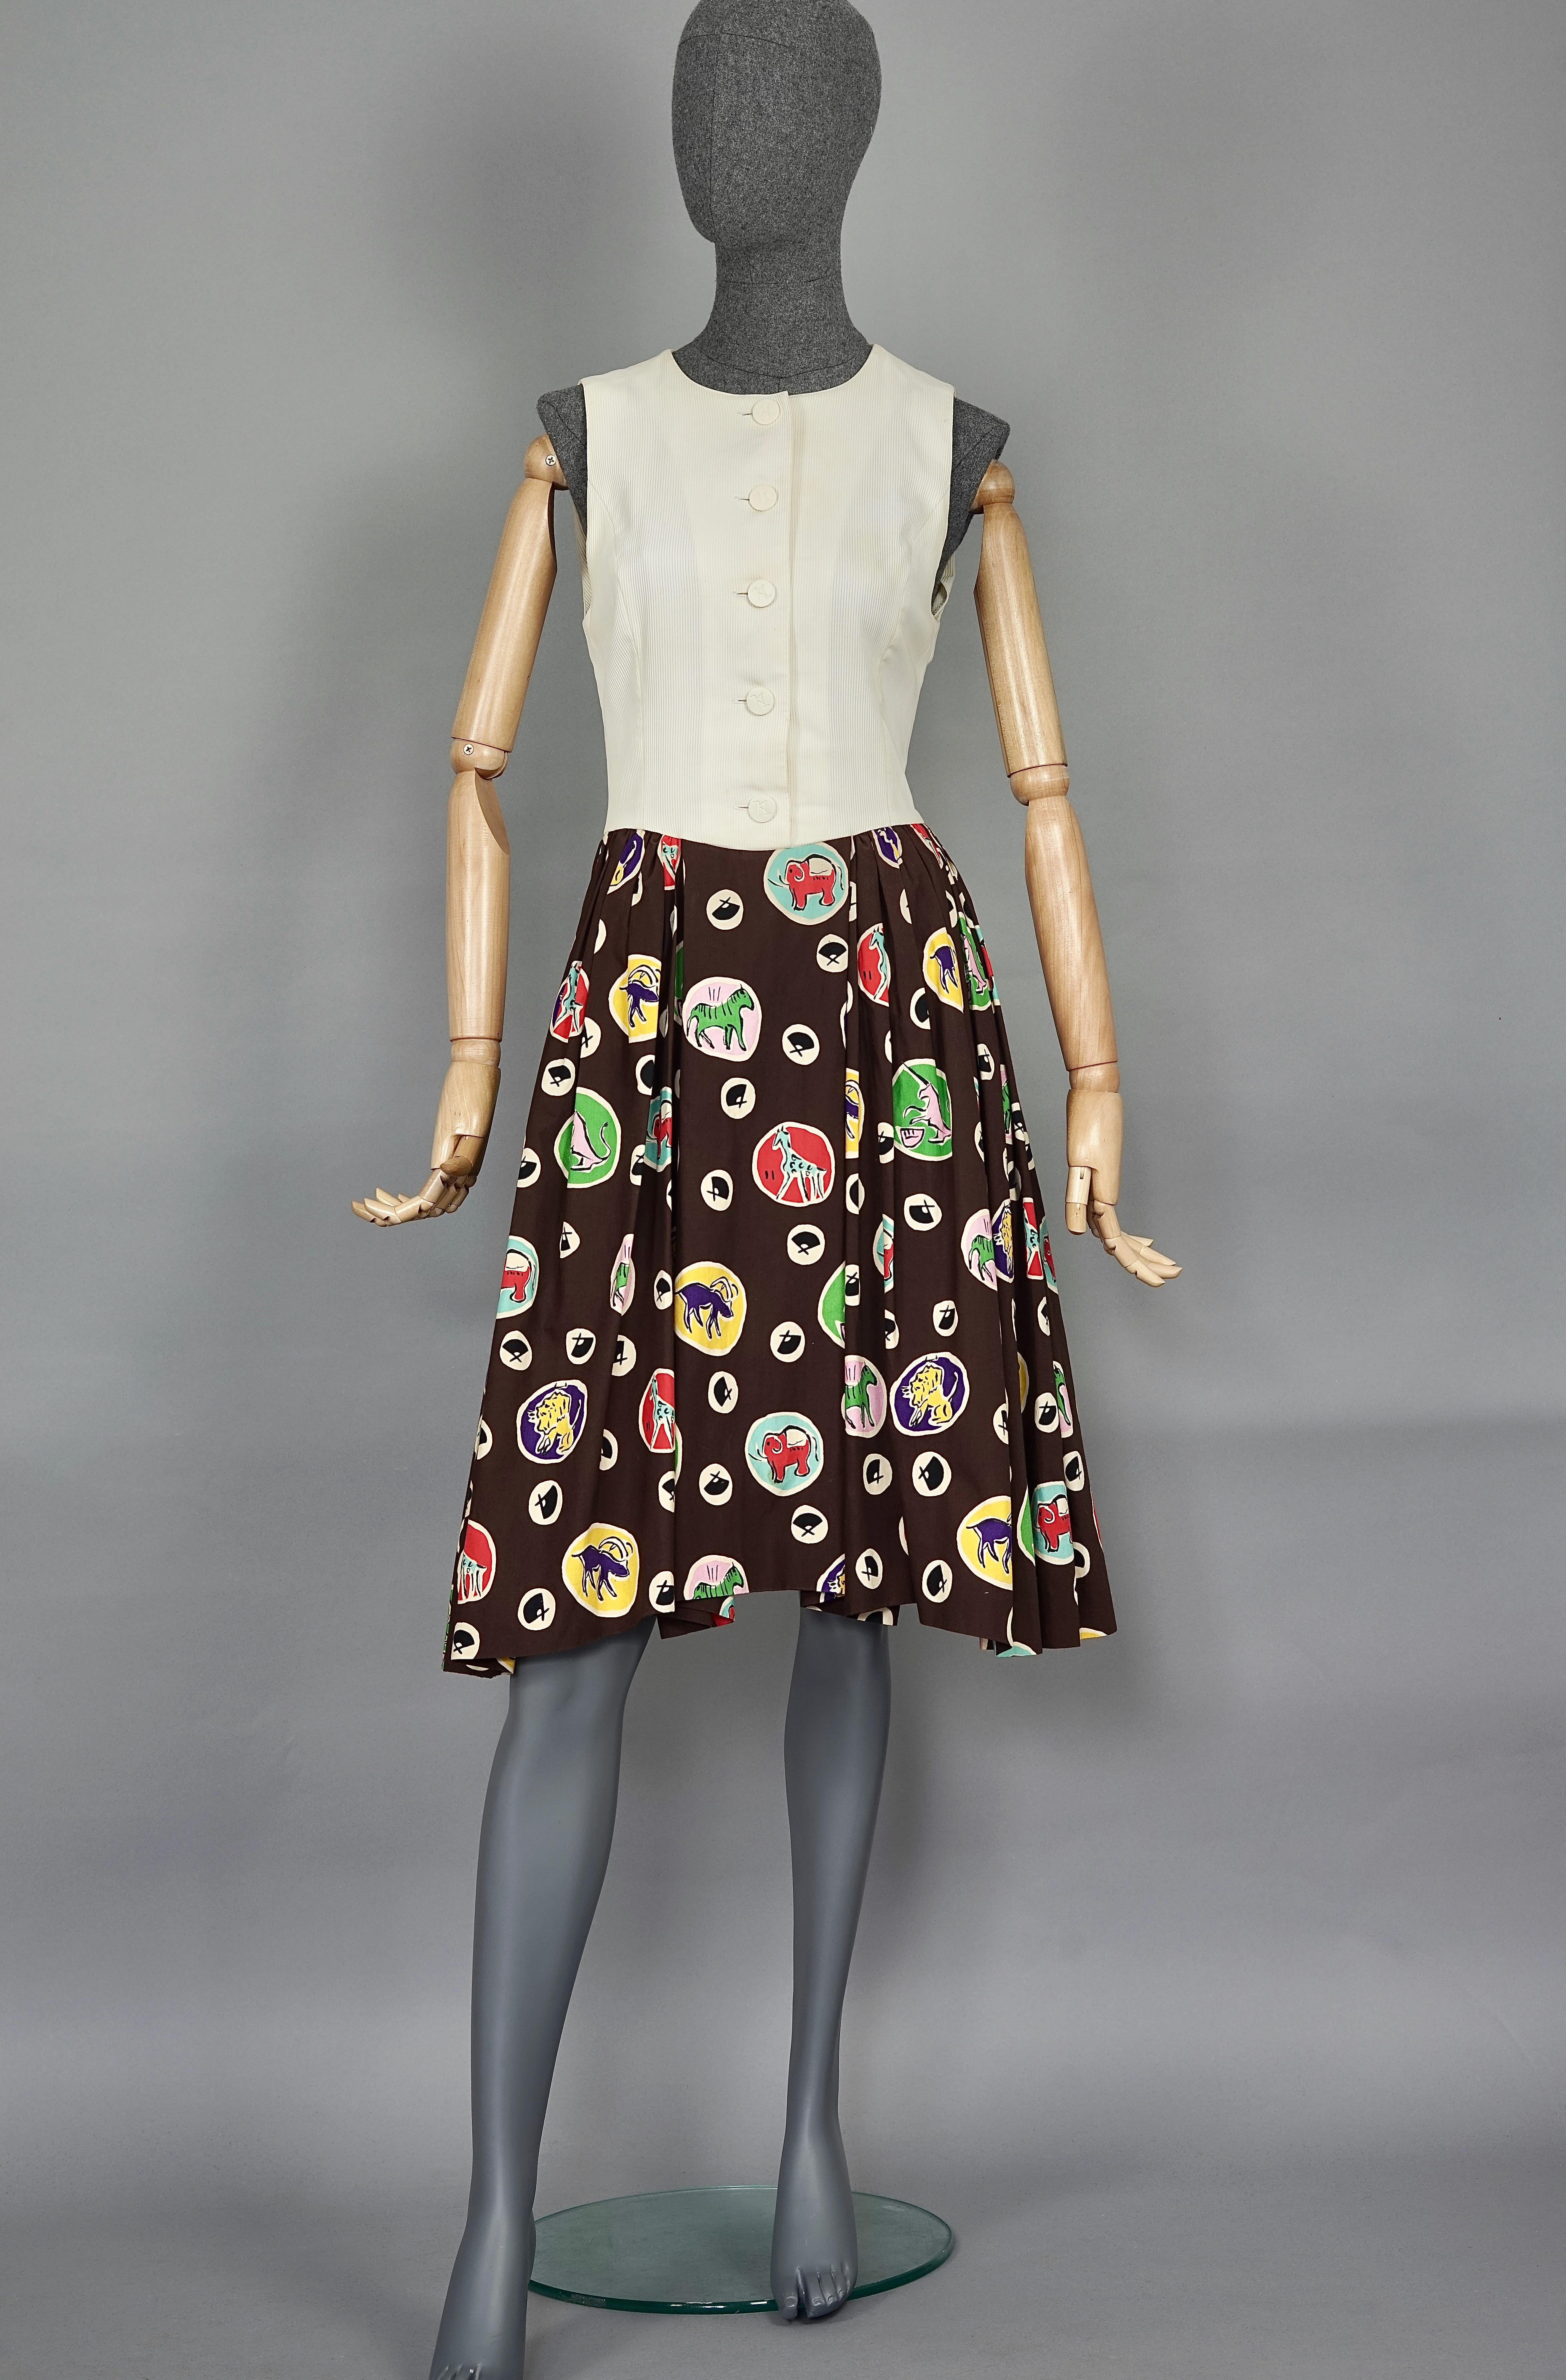 Vintage KARL LAGERFELD Colorful Logo Print Pleated Sleeveless Dress

Measurements taken laid flat, please double bust and waist:
Shoulder: 12.20 inches (31 cm)
Bust: 17.32 inches (44 cm)
Waist: 14.56 inches (37 cm)
Hips: Free
Length: 41.33 inches